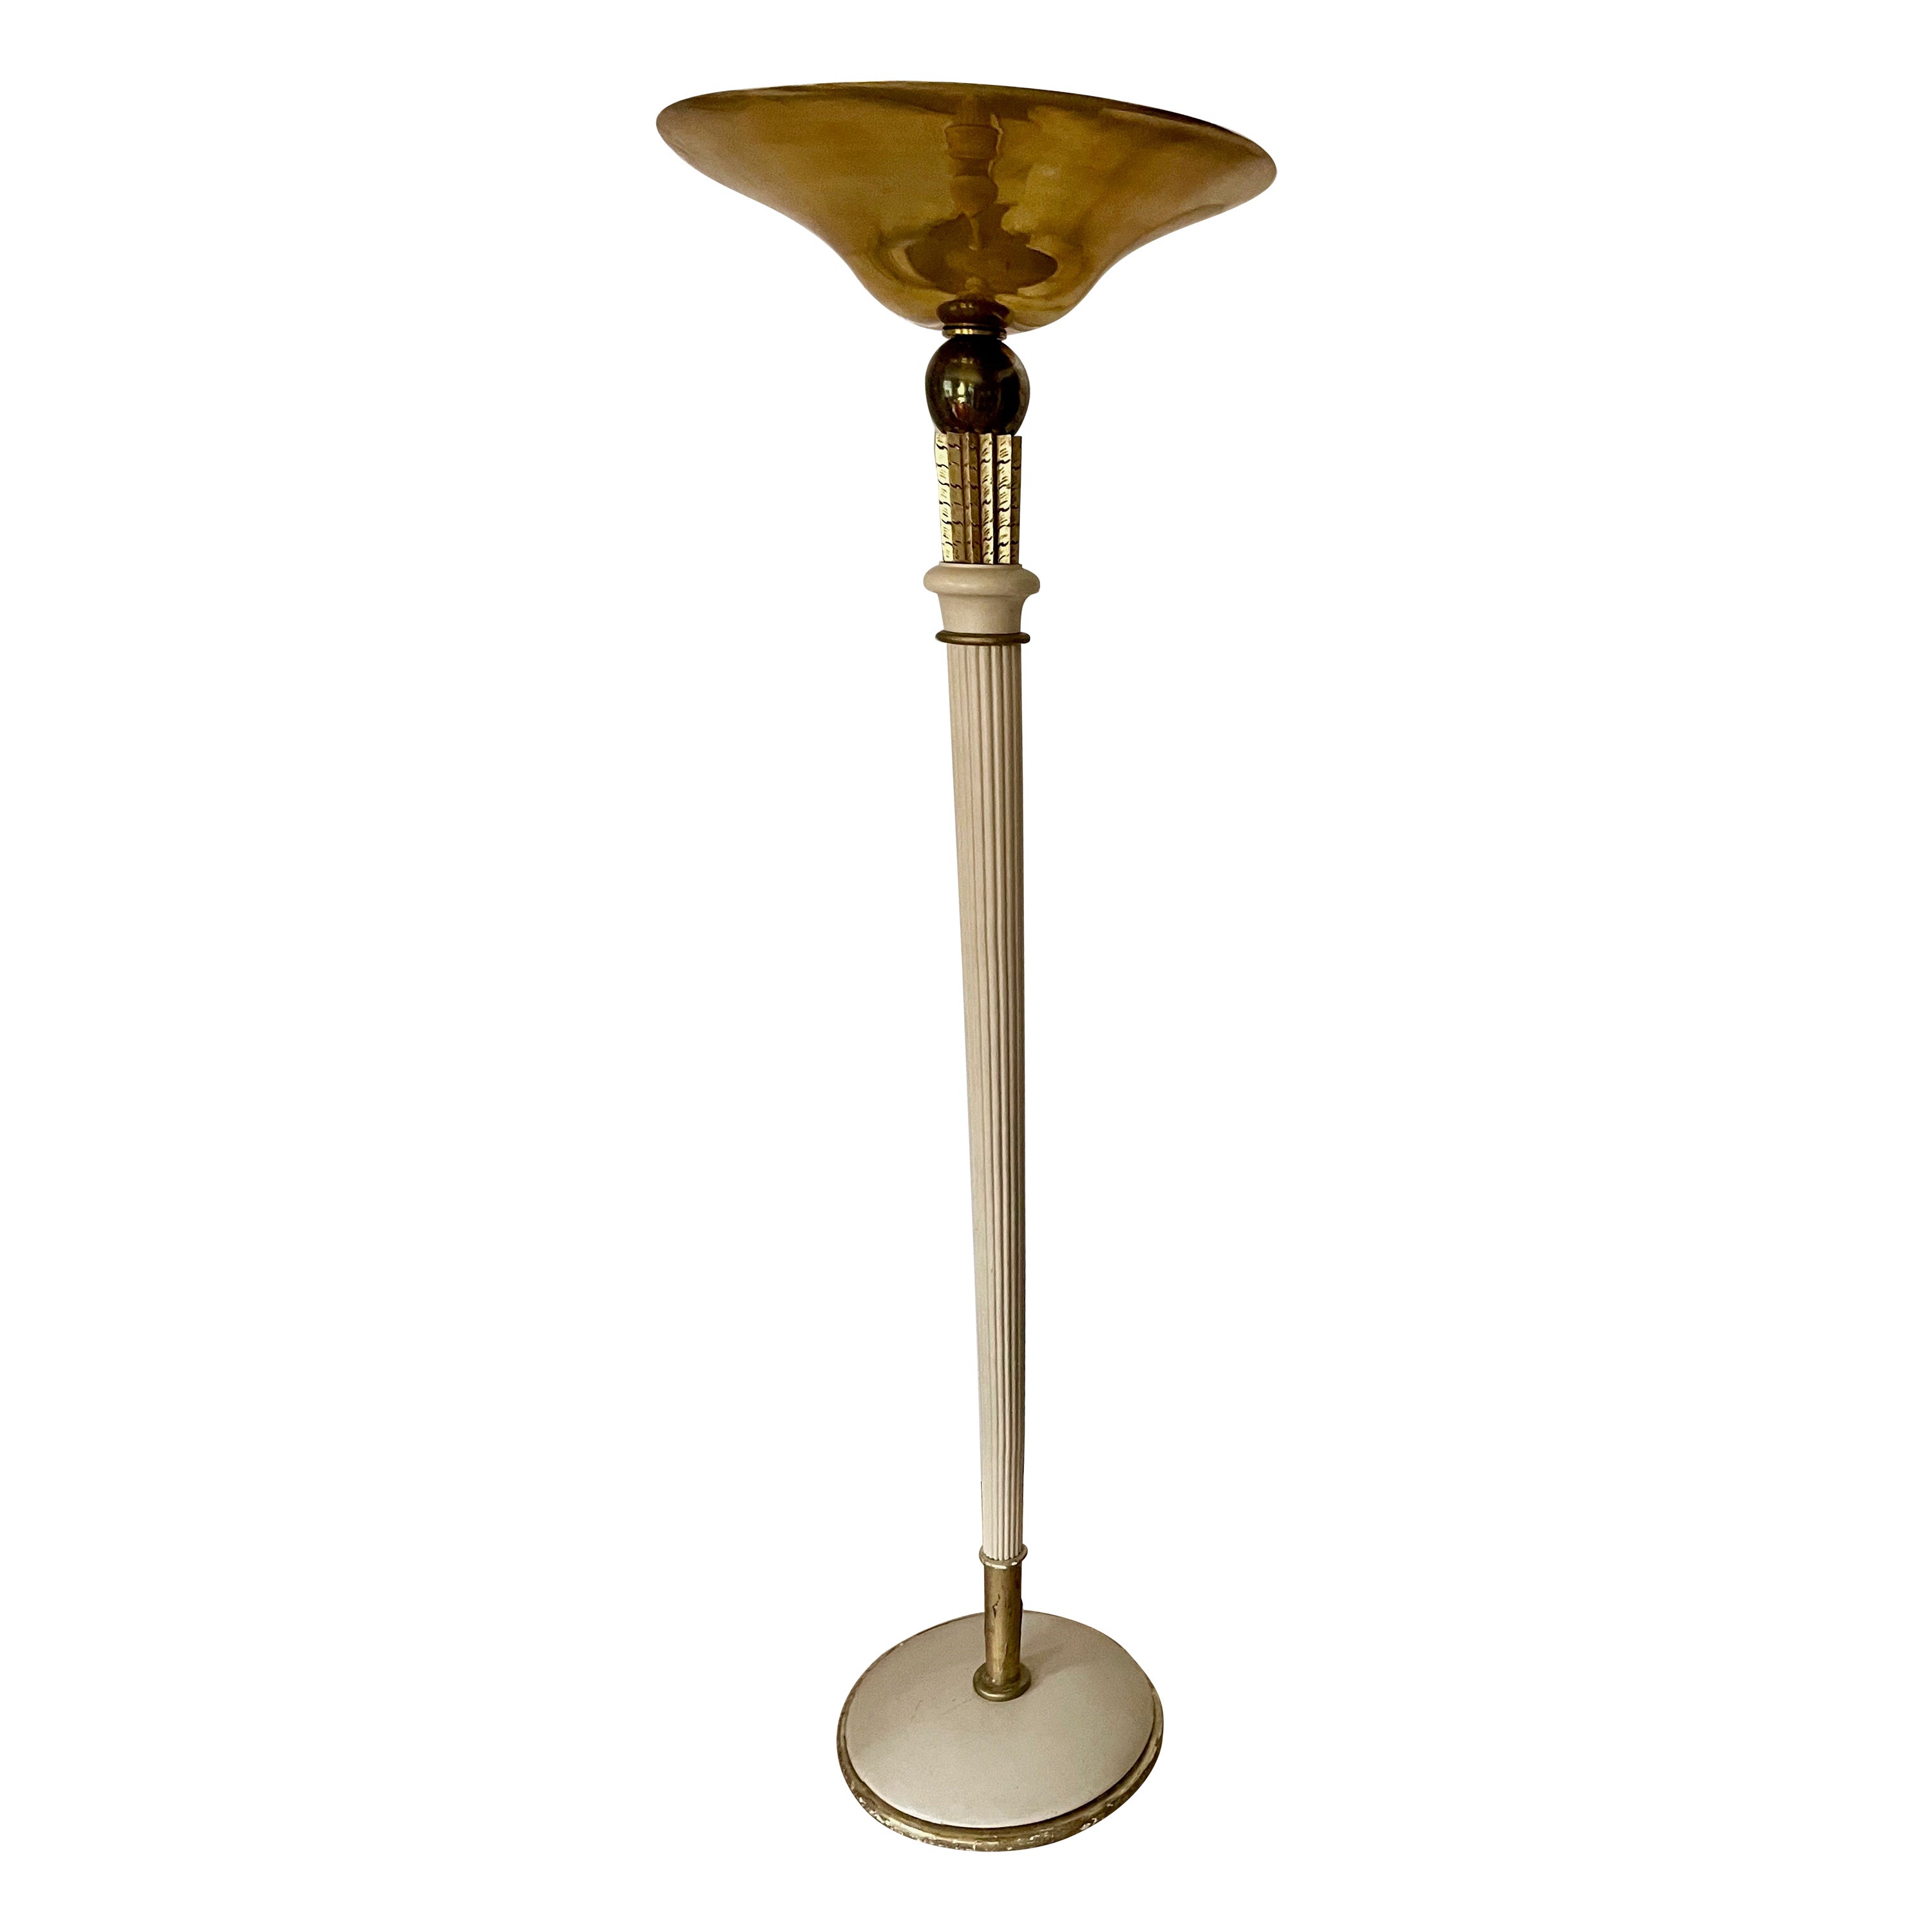 Art Deco Cream Lacquered Floor Lamp Attributed to Dominique, France 1935. For Sale